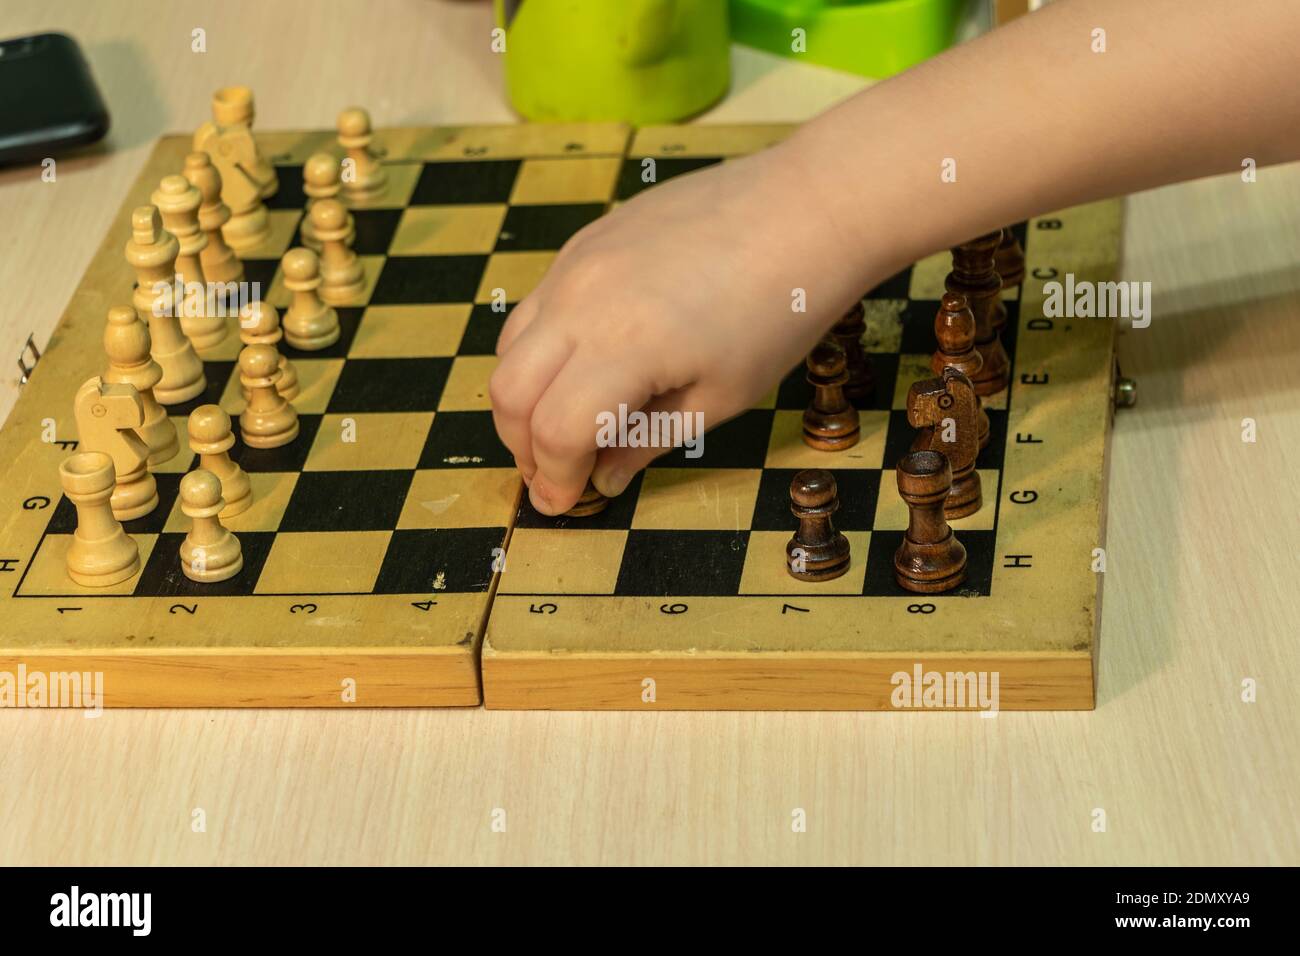 The child's hand holds a chess piece on a chessboard. Photo taken in Chelyabinsk, Russia. Stock Photo